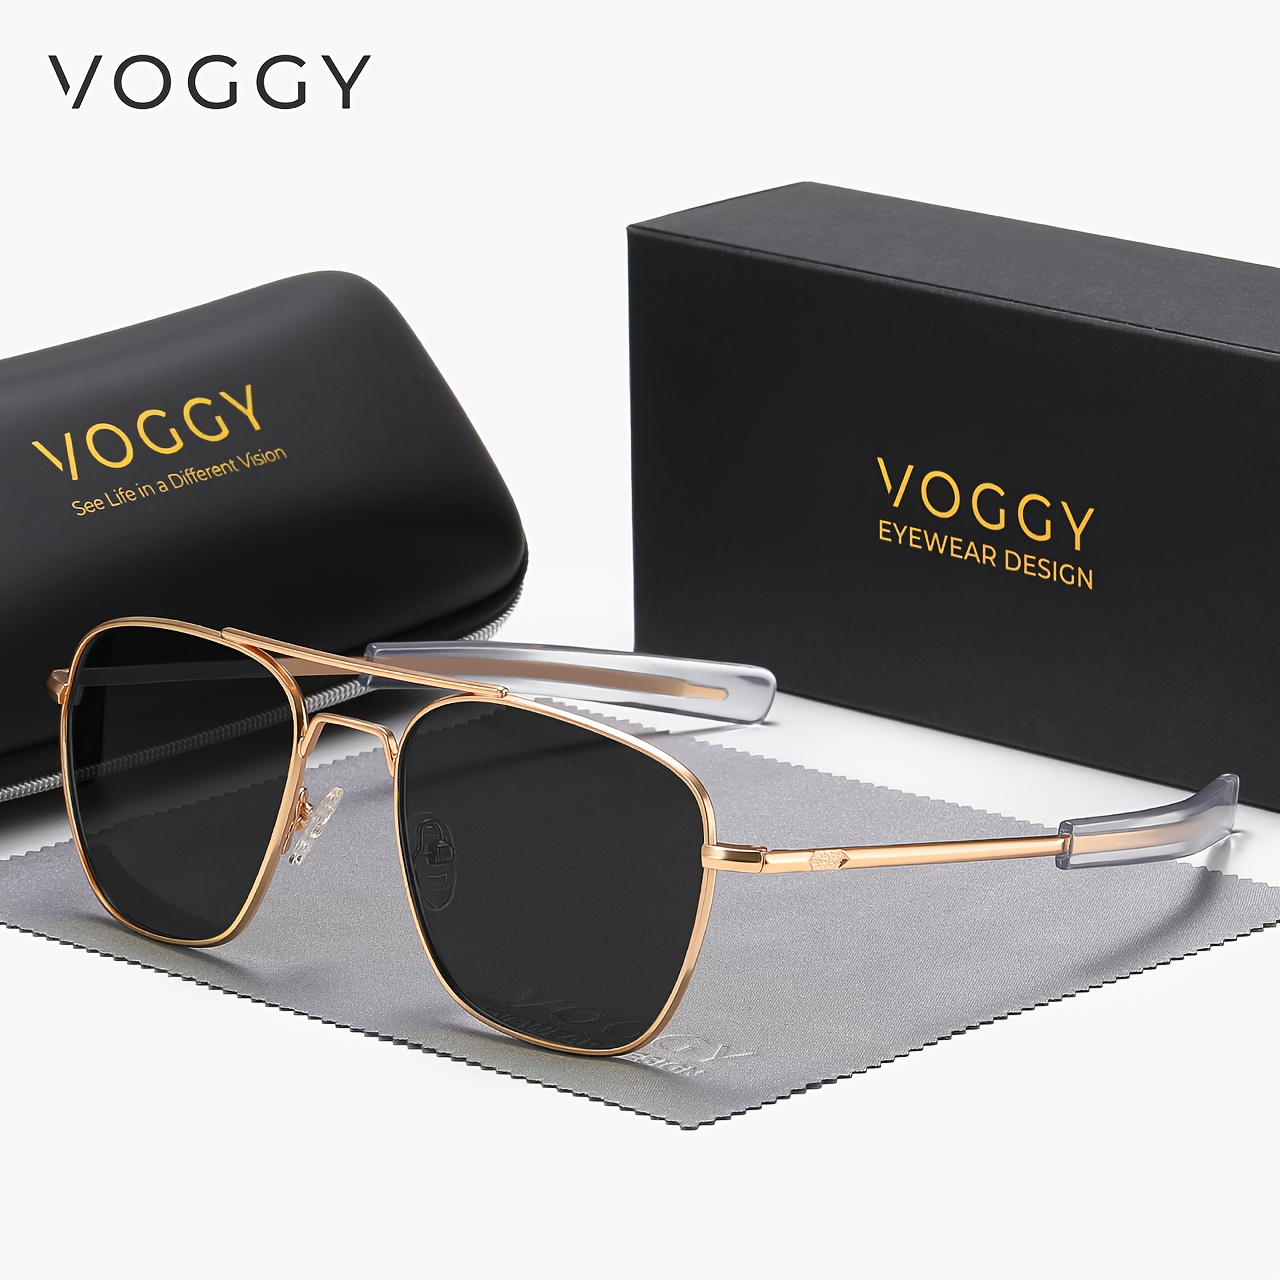 

Voggy Polarized Aviator Sunglasses For Women Men Vintage Mirrored Fashion Metal Sun Shades For Driving Beach Party With Gifts Box Mother's Day/give Gifts